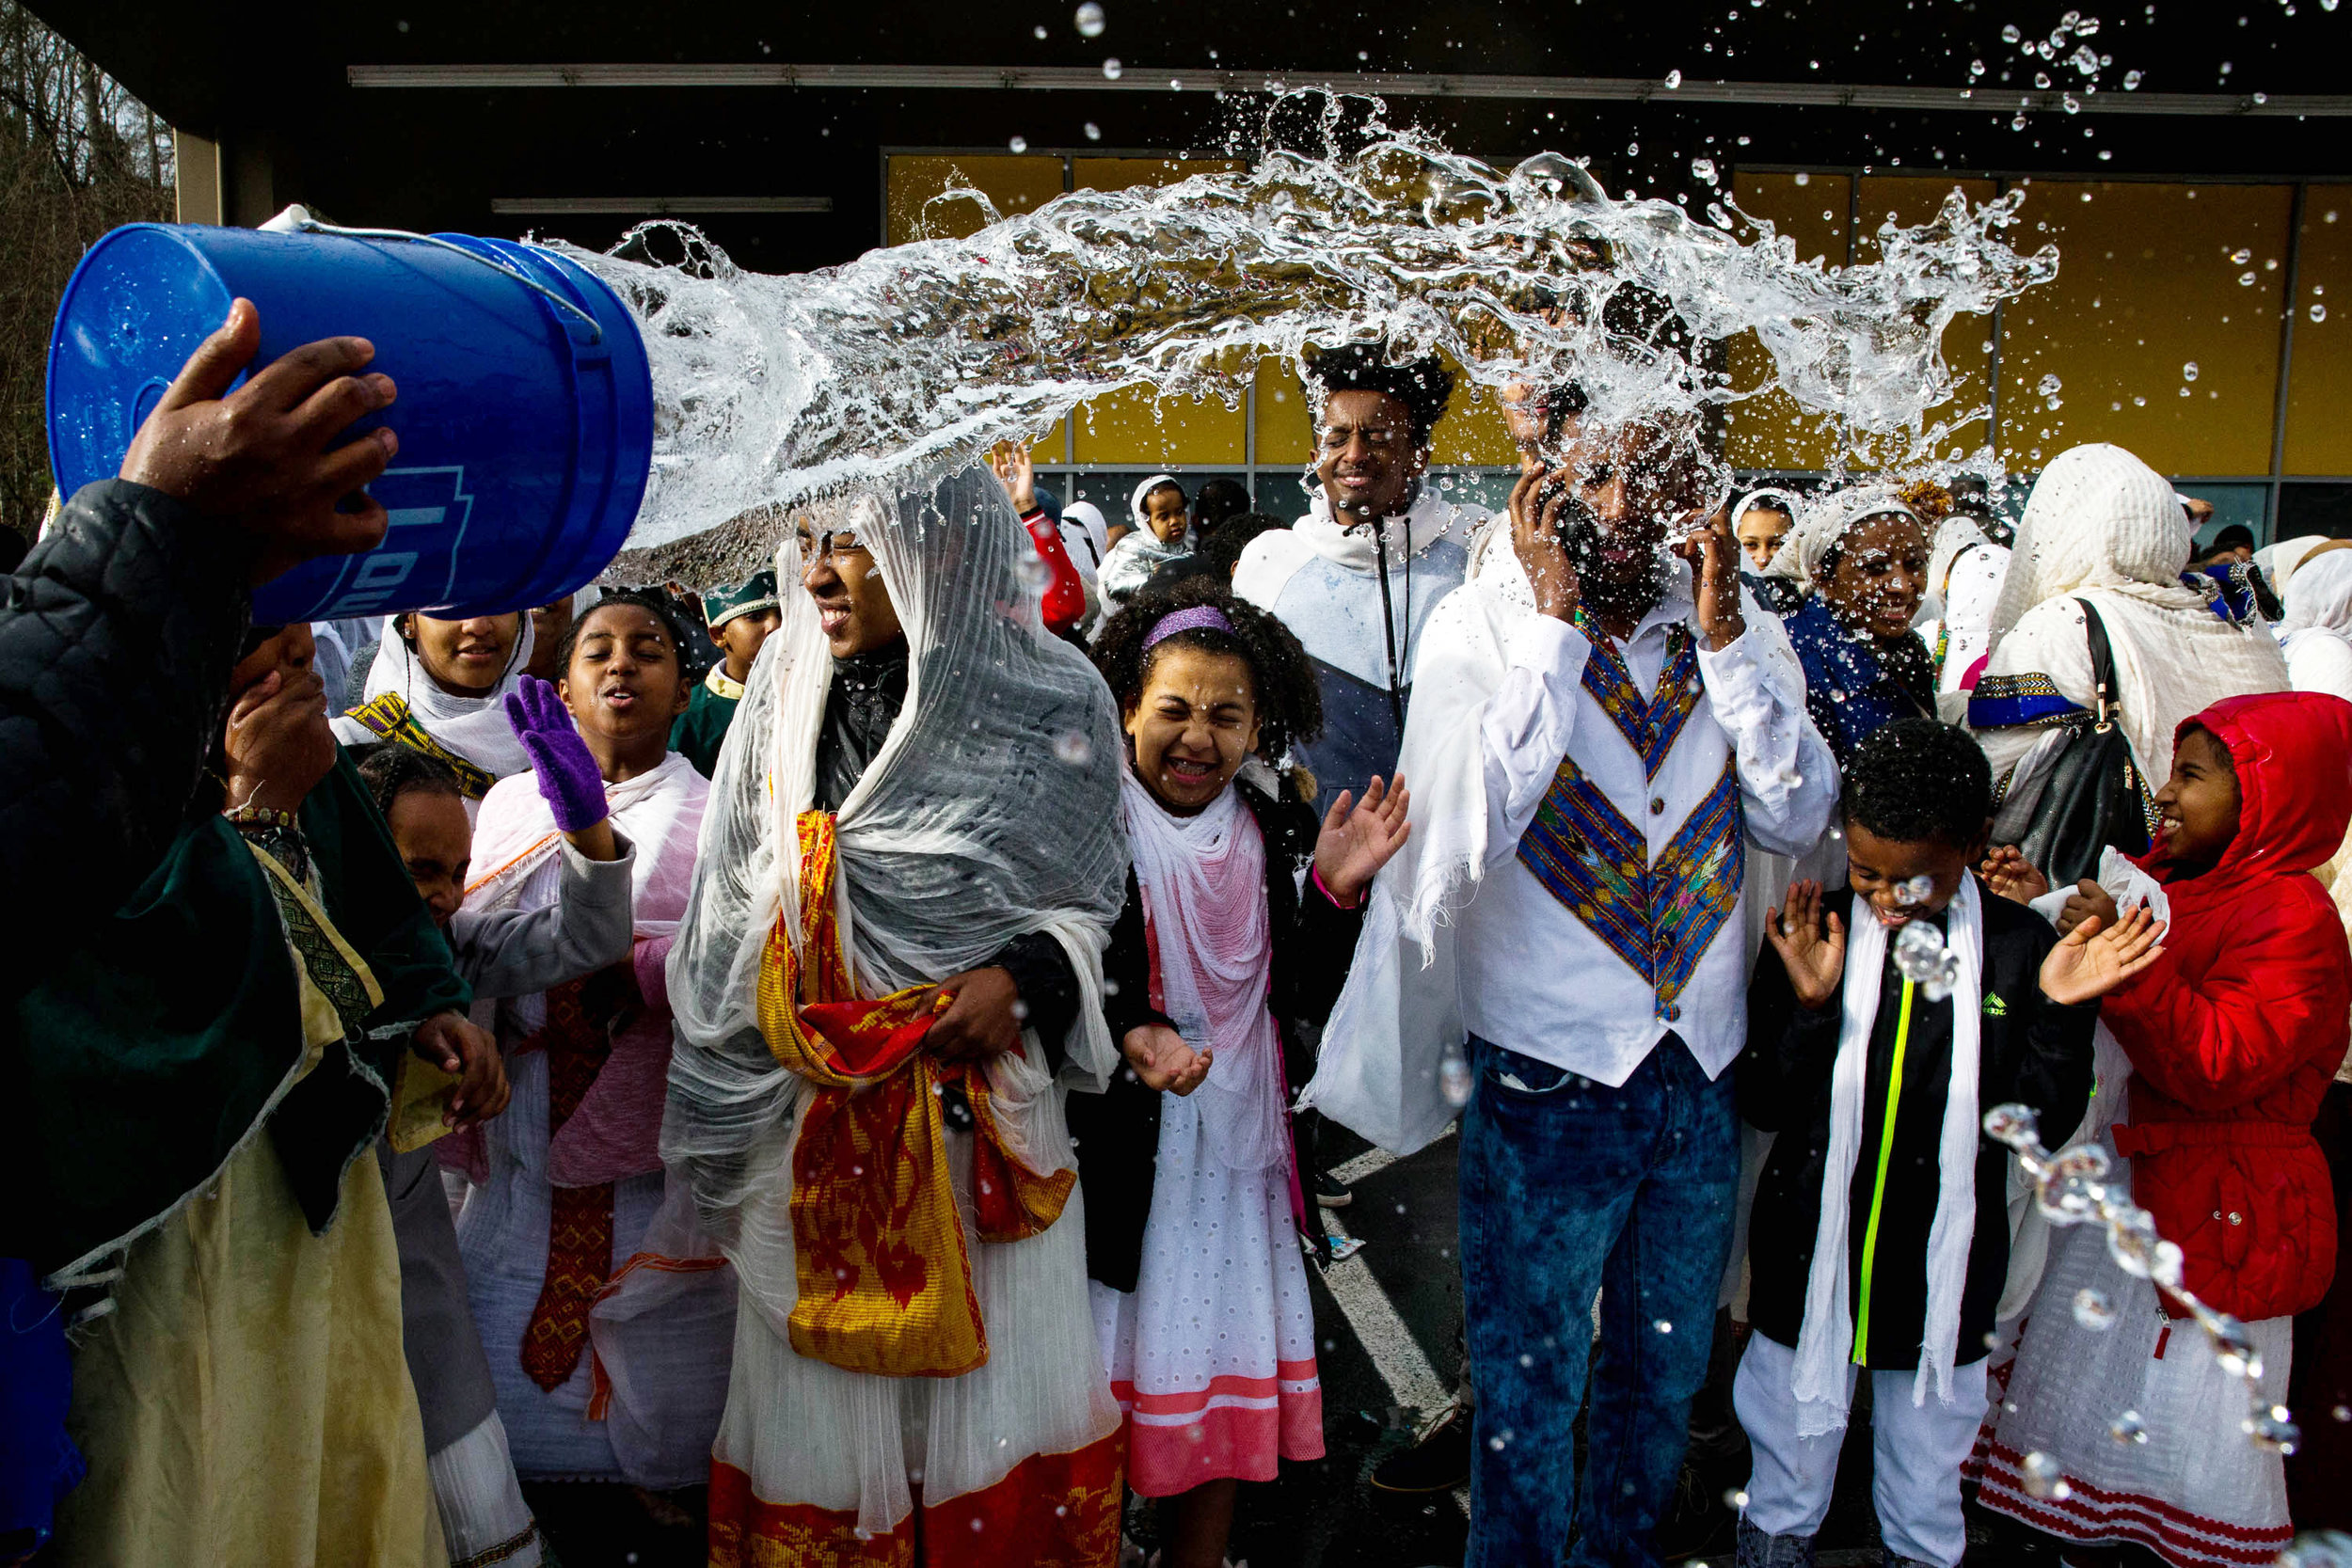  Congregants have holy water thrown on them during Timkat, the Ethiopian Orthodox Epiphany celebration, at Kings Hall in Seattle on Sunday, Jan. 21, 2018. The celebration started Saturday and continued overnight through Sunday afternoon. After the wa